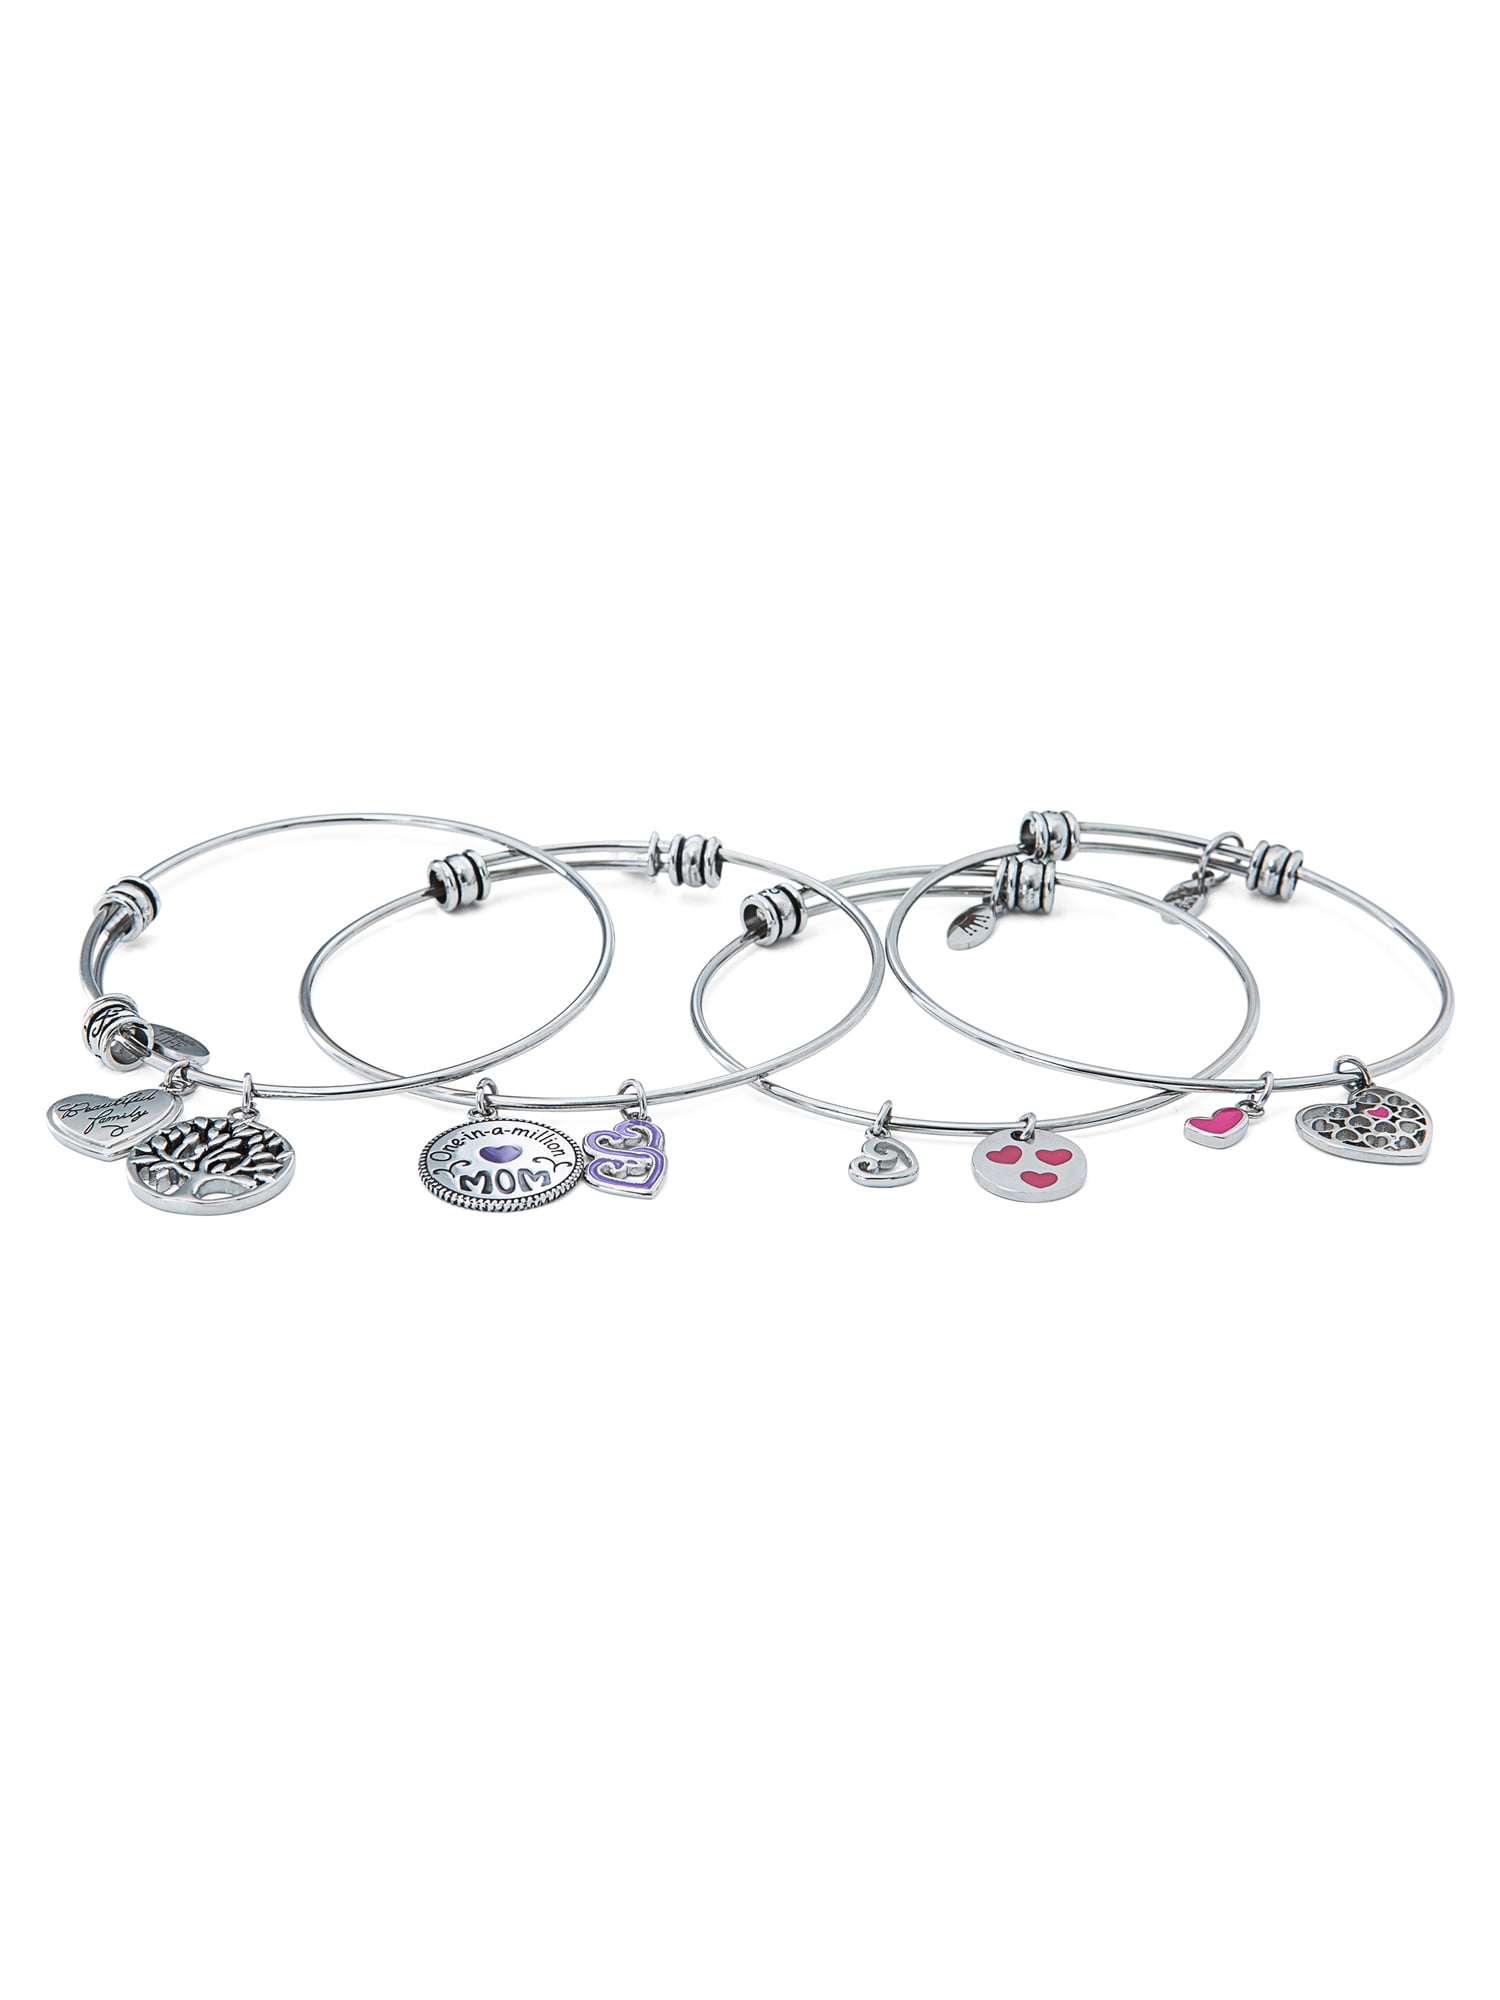 Connections From Hallmark Stainless Steel Mom Charm Bangle Set ...